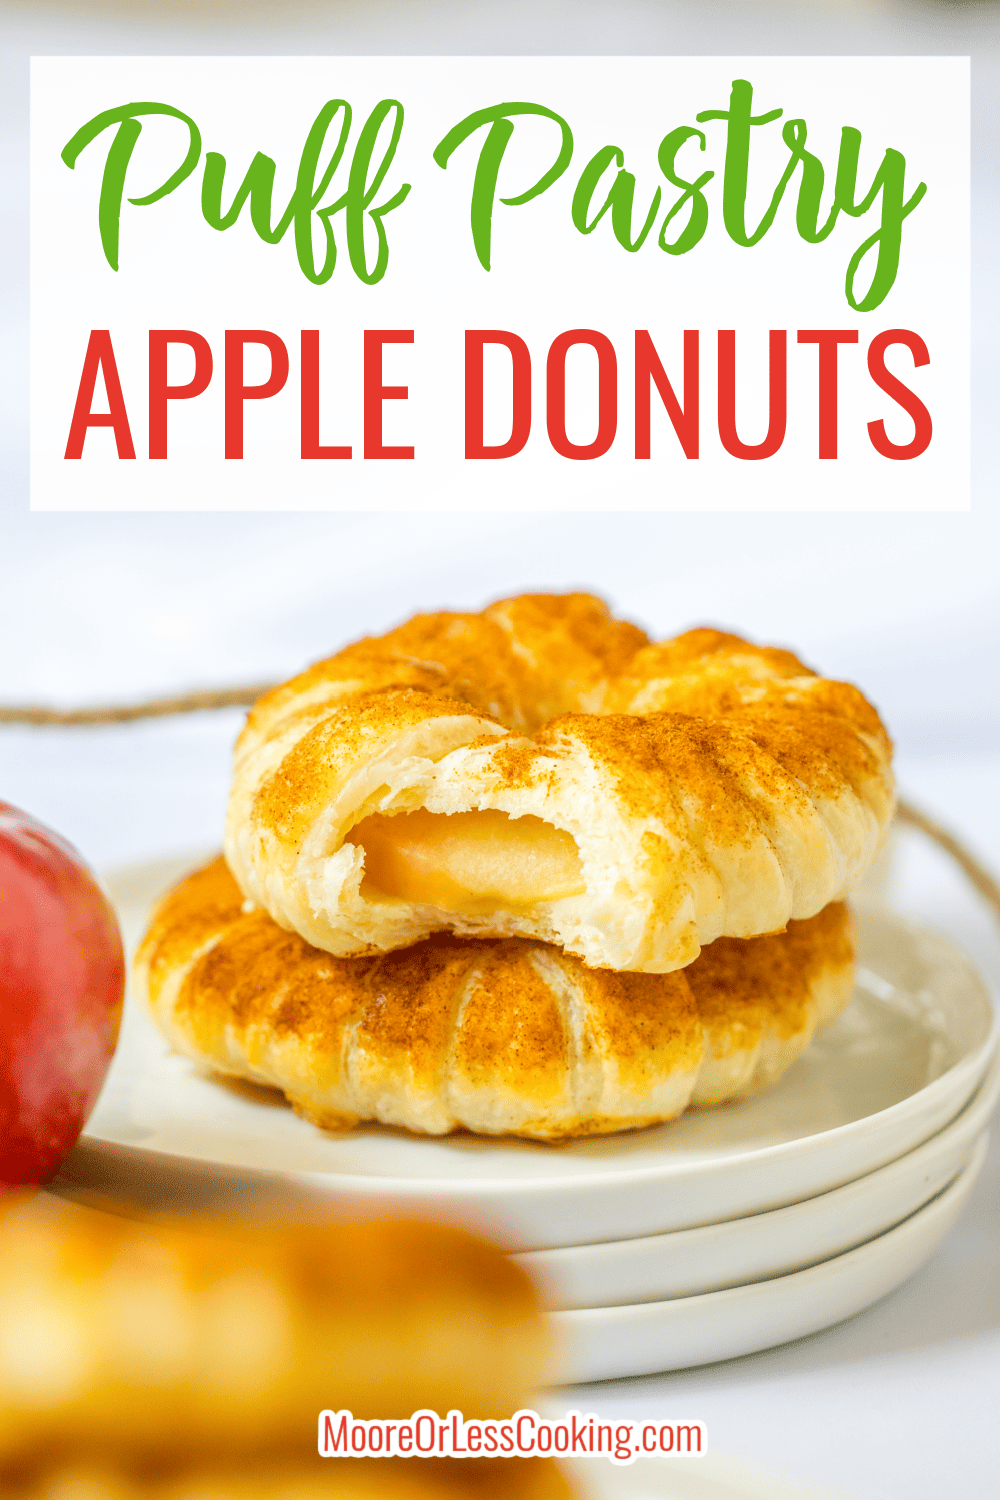 Sliced apple rings wrapped in a flaky crust and dusted with sweet and fragrant cinnamon sugar make these Puff Pastry Apple Donuts the perfect cozy fall treat. Quick and easy to assemble, these baked donuts taste just like apple pie! via @Mooreorlesscook